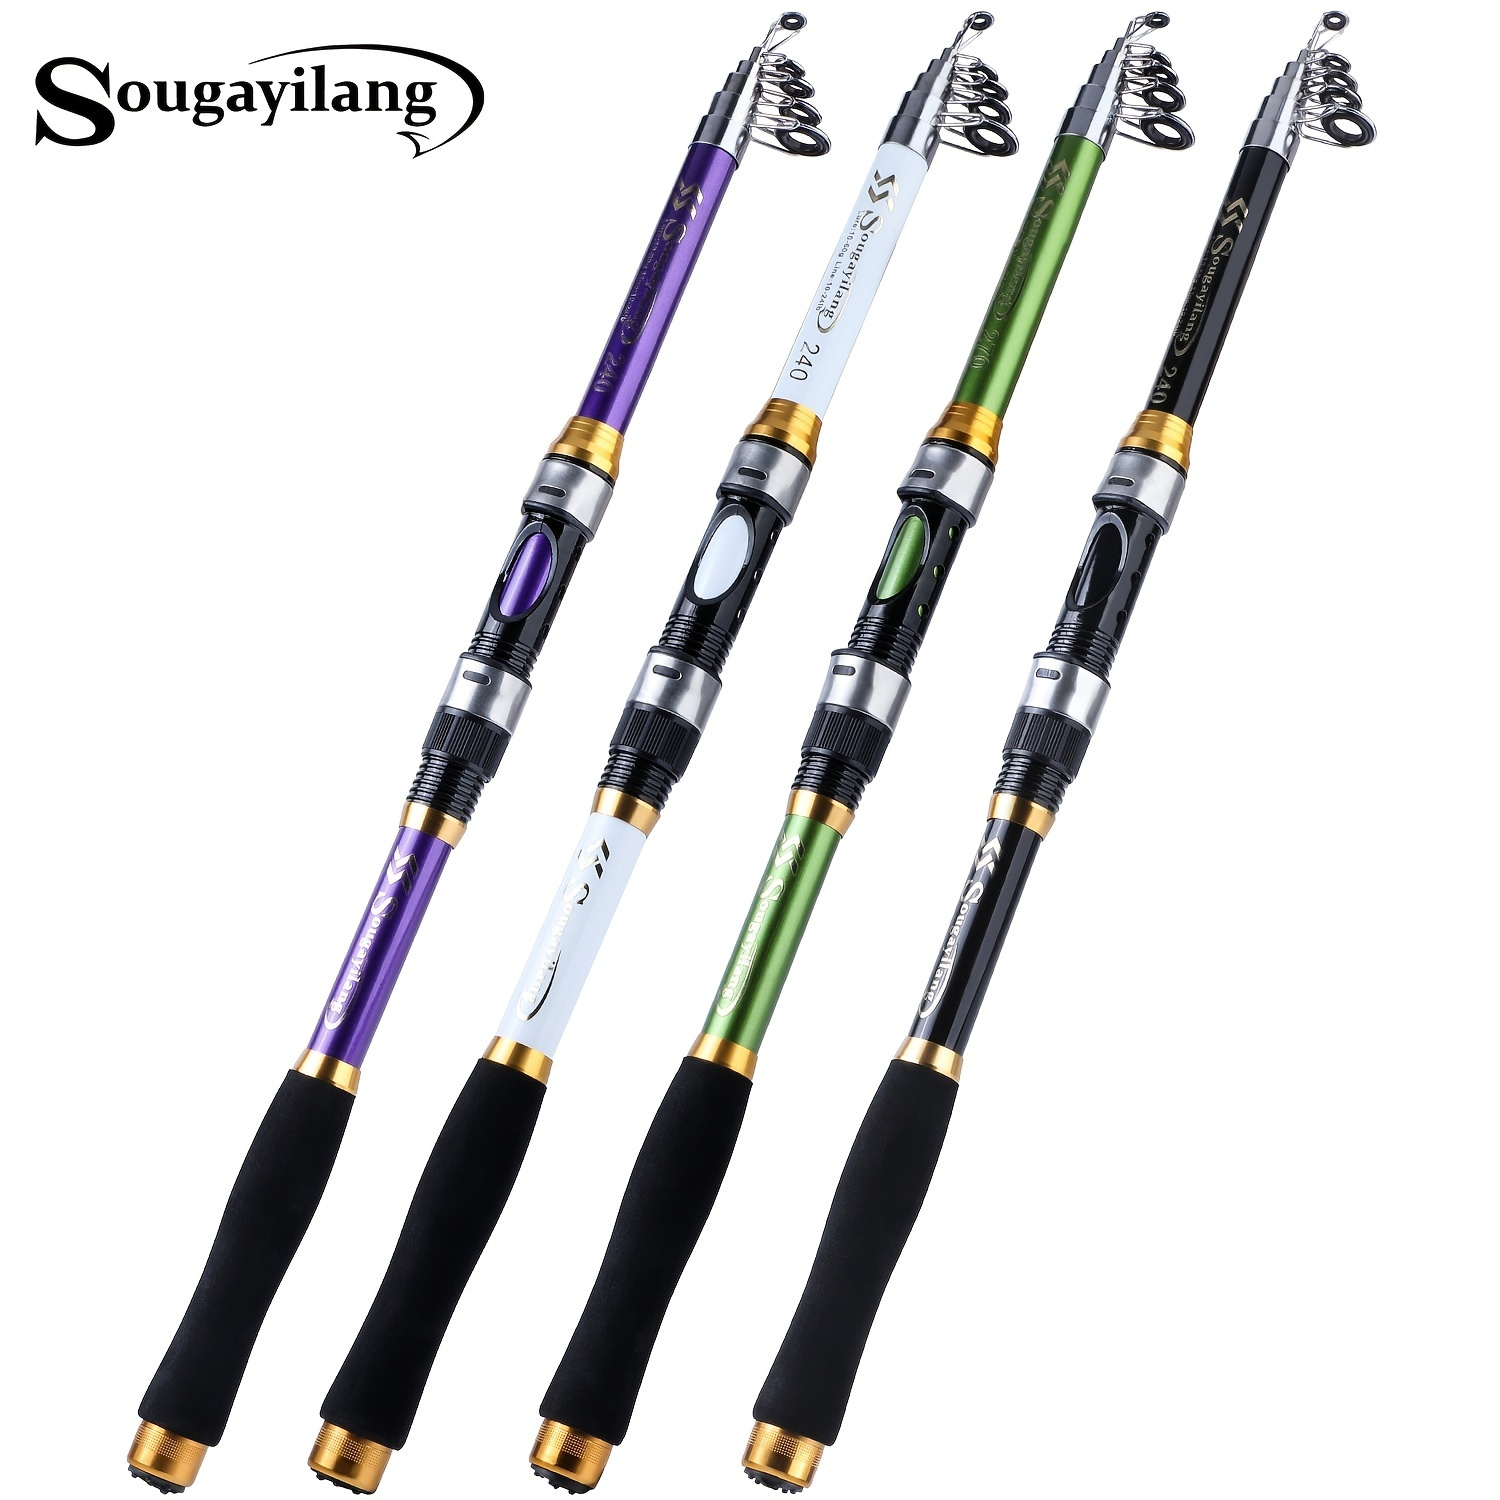 

Sougayilang Telescopic Fishing Rod: Portable & Compact Design For Saltwater Fishing On The Go!